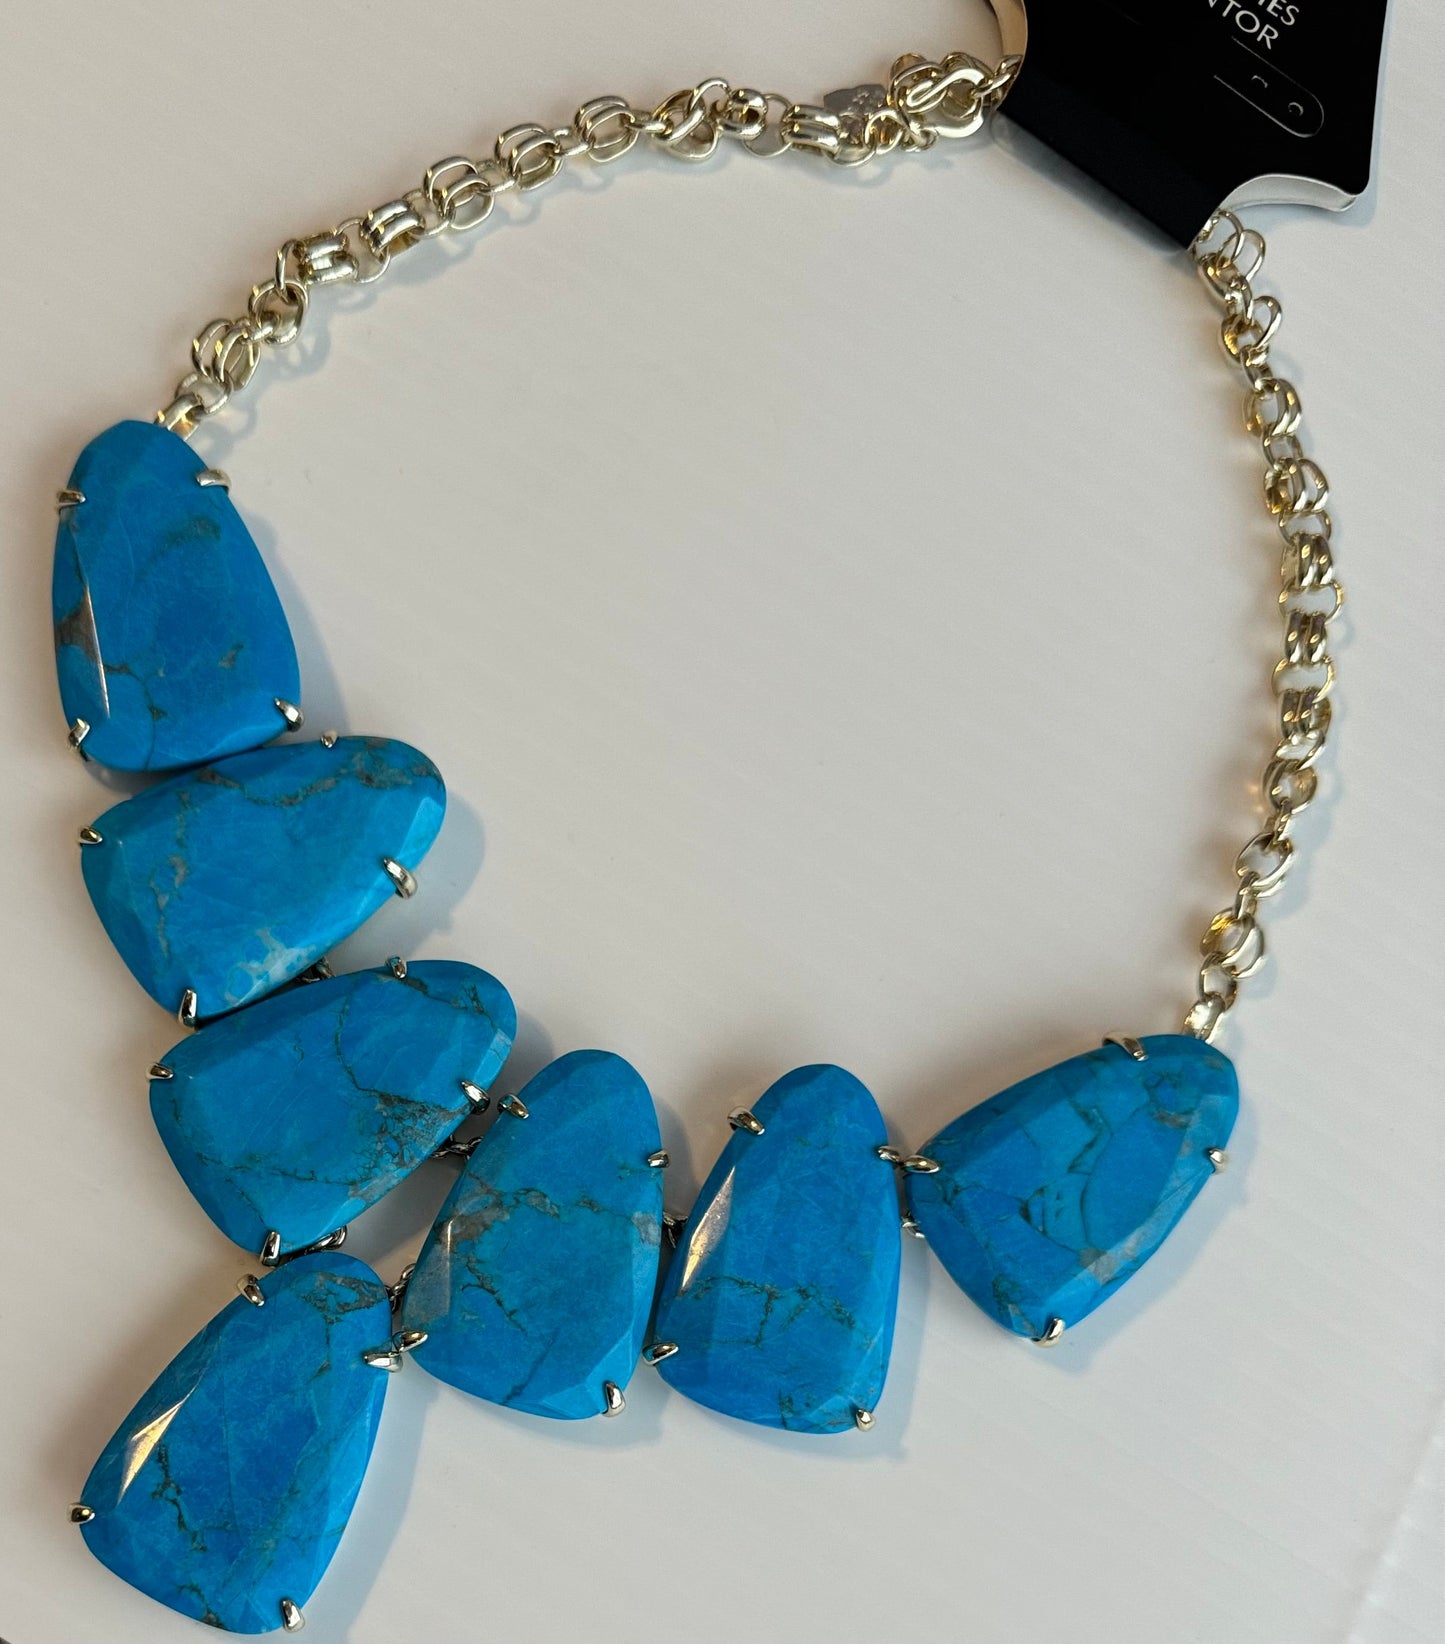 Necklace Layered By Kendra Scott